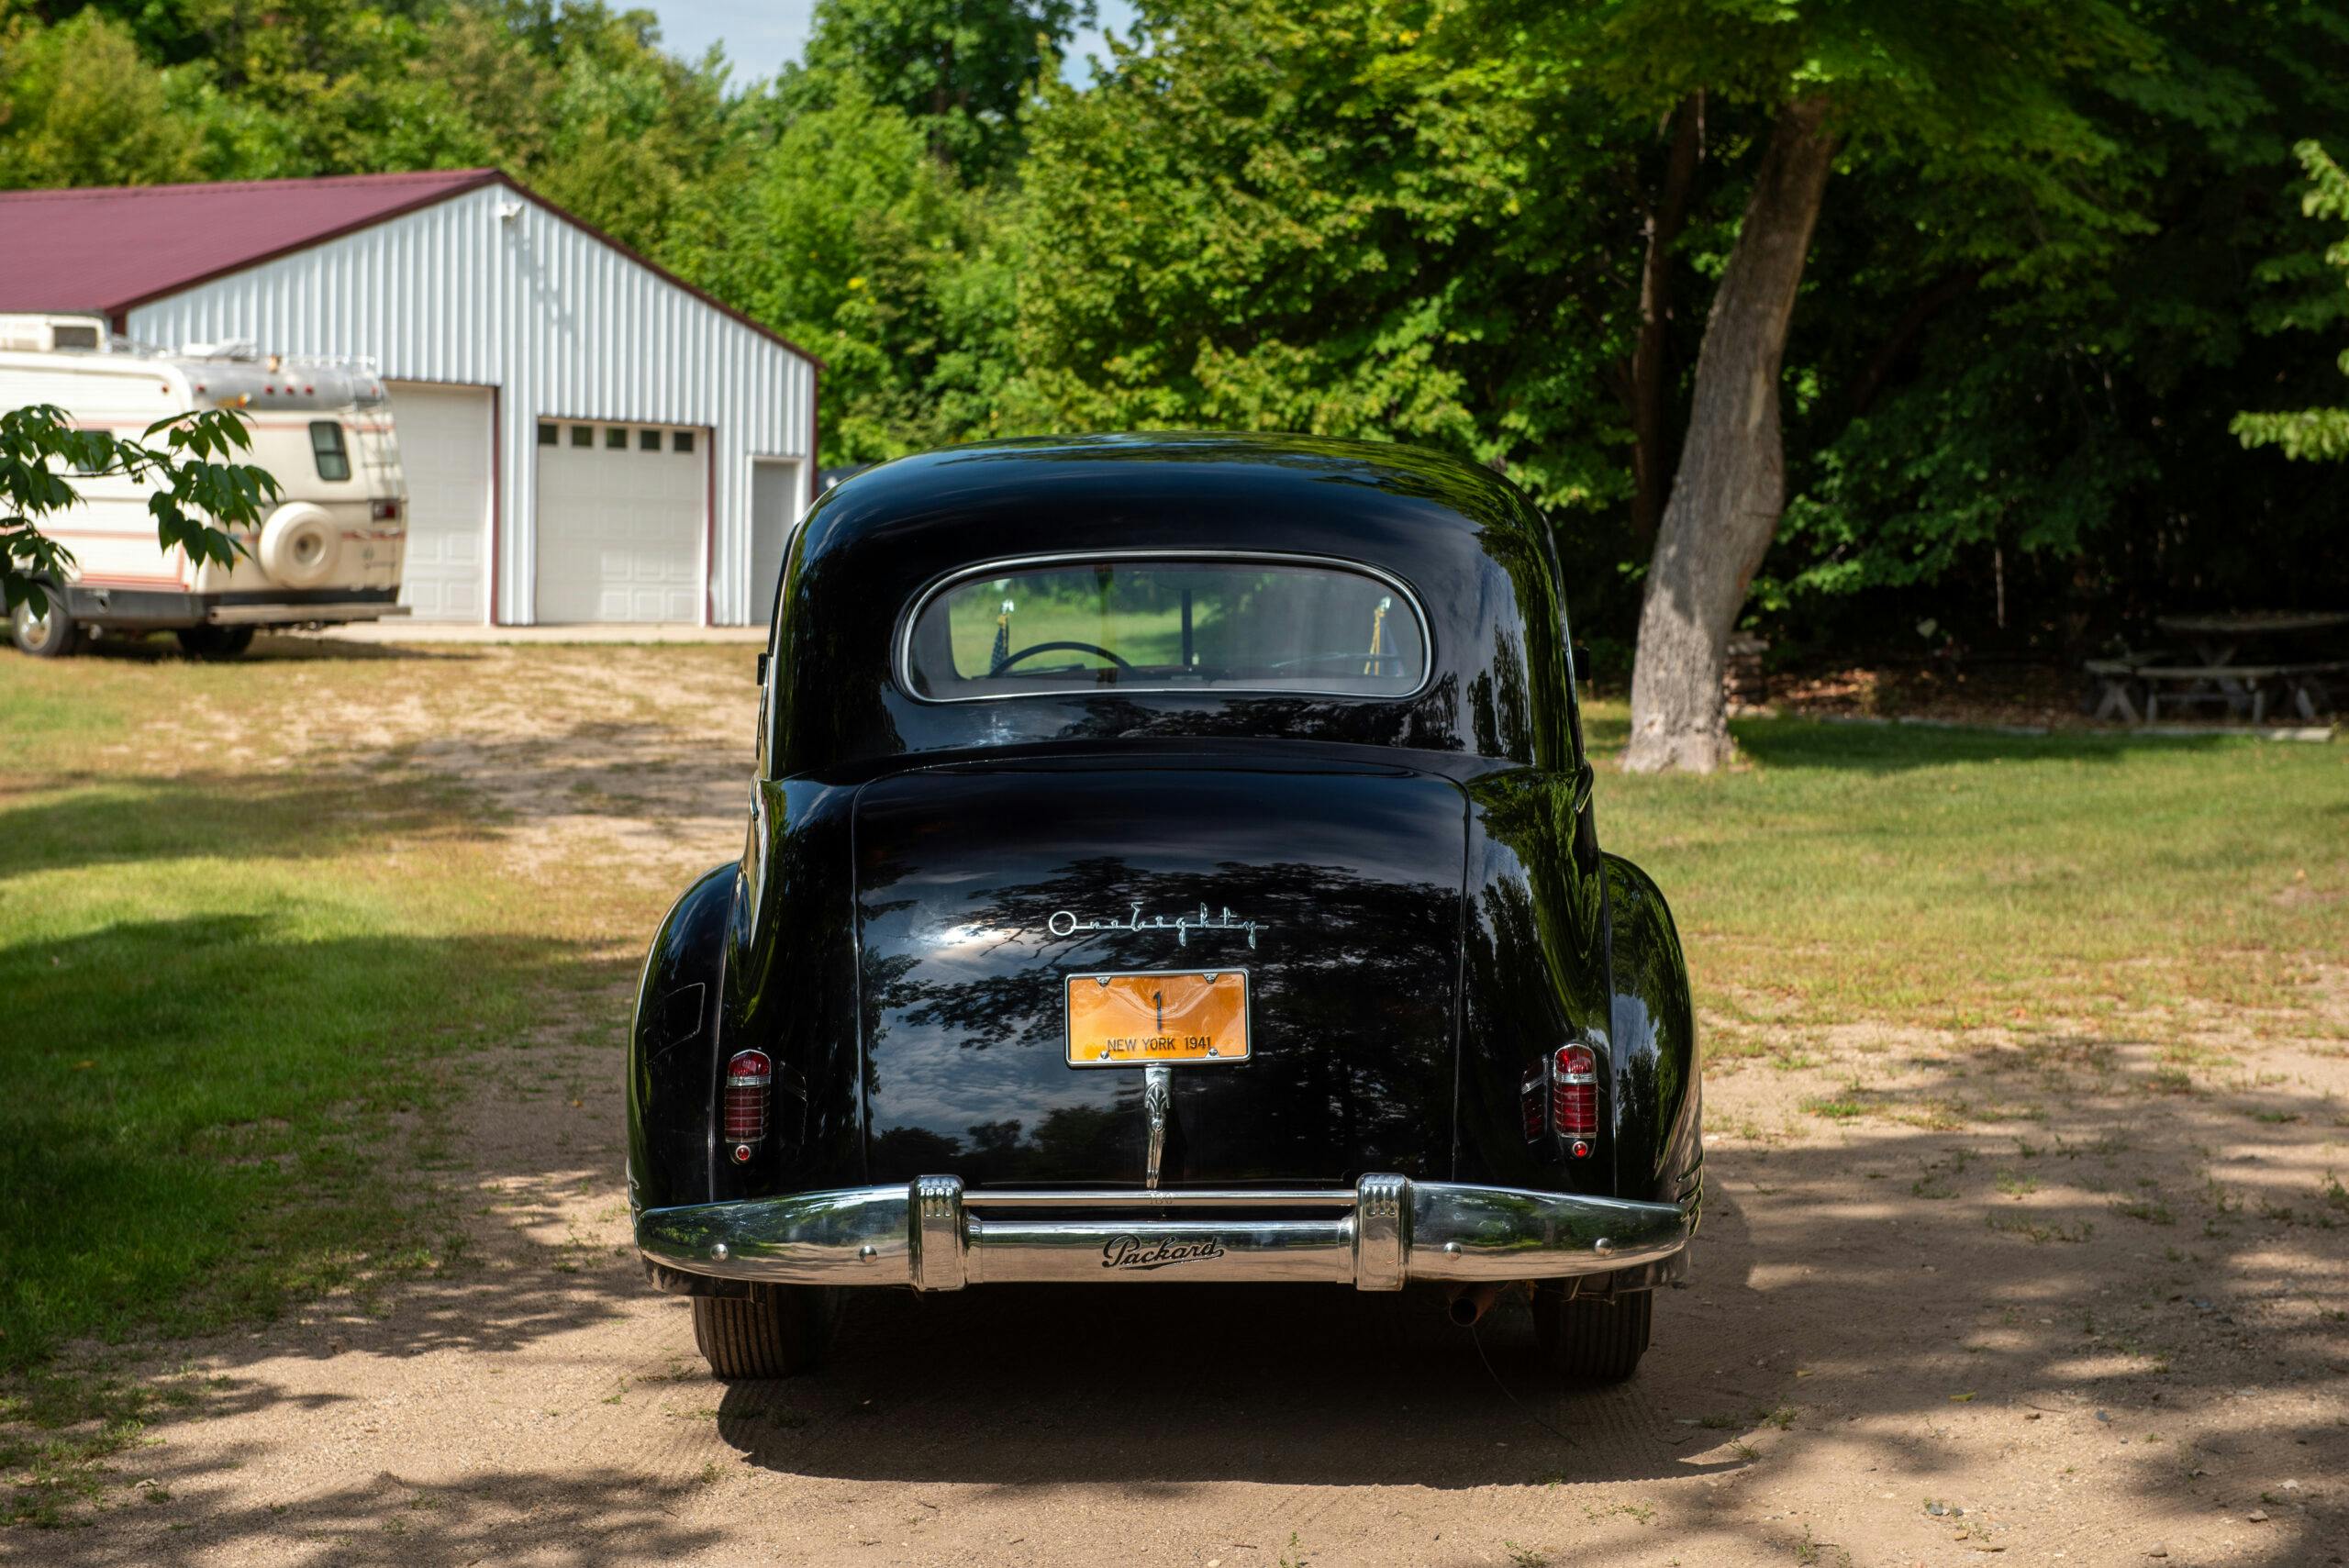 1941 Packard Super Eight One-Eighty Limo rear